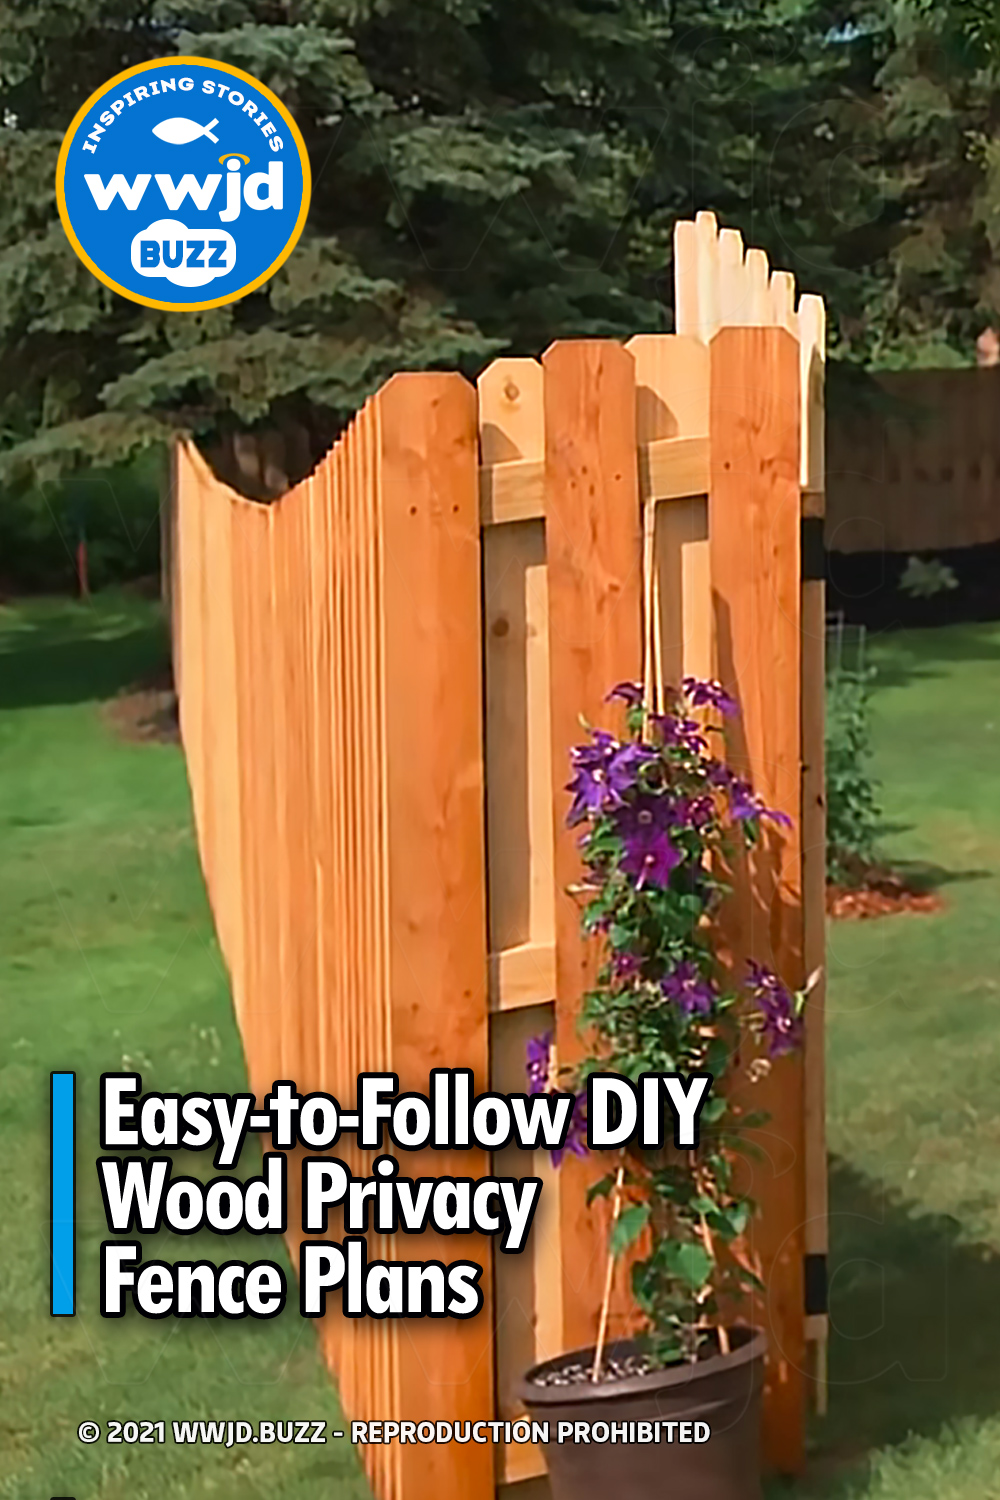 Easy-to-Follow DIY Wood Privacy Fence Plans - WWJD